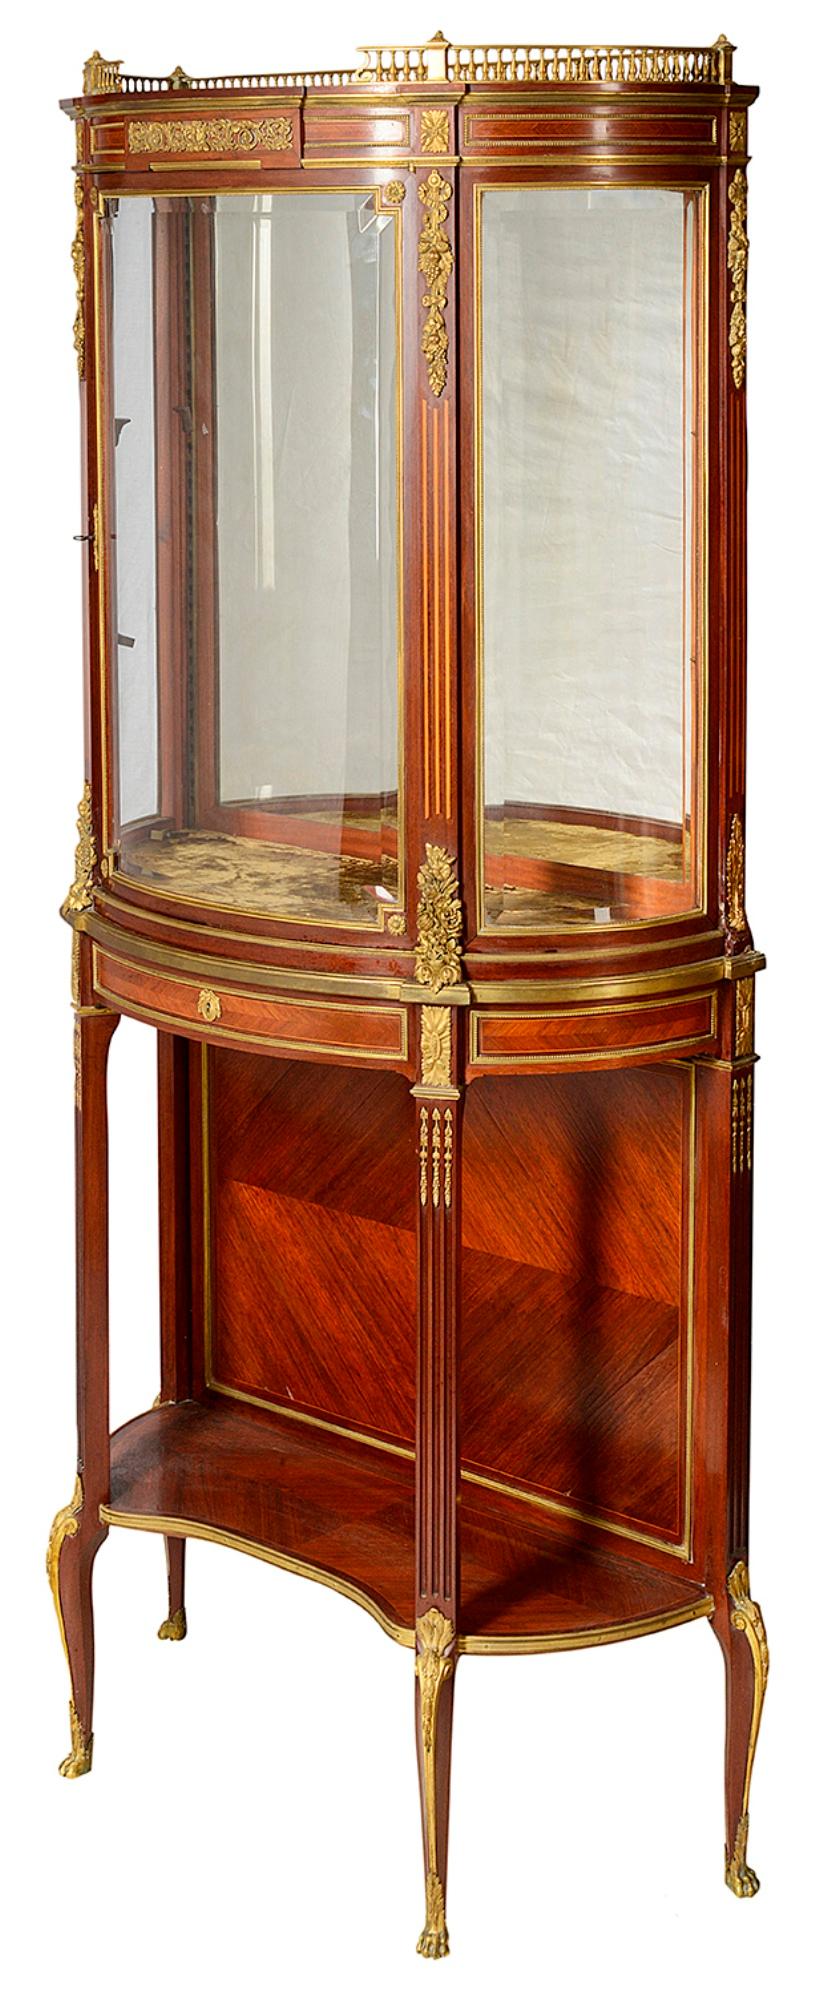 A very good quality pair of late 19th century French mahogany bow fronted display cabinets, each with a gallery to the top, gilded ormolu foliate and molded mounts, central doors with a glass shelf within, a frieze drawer above a shelf beneath with